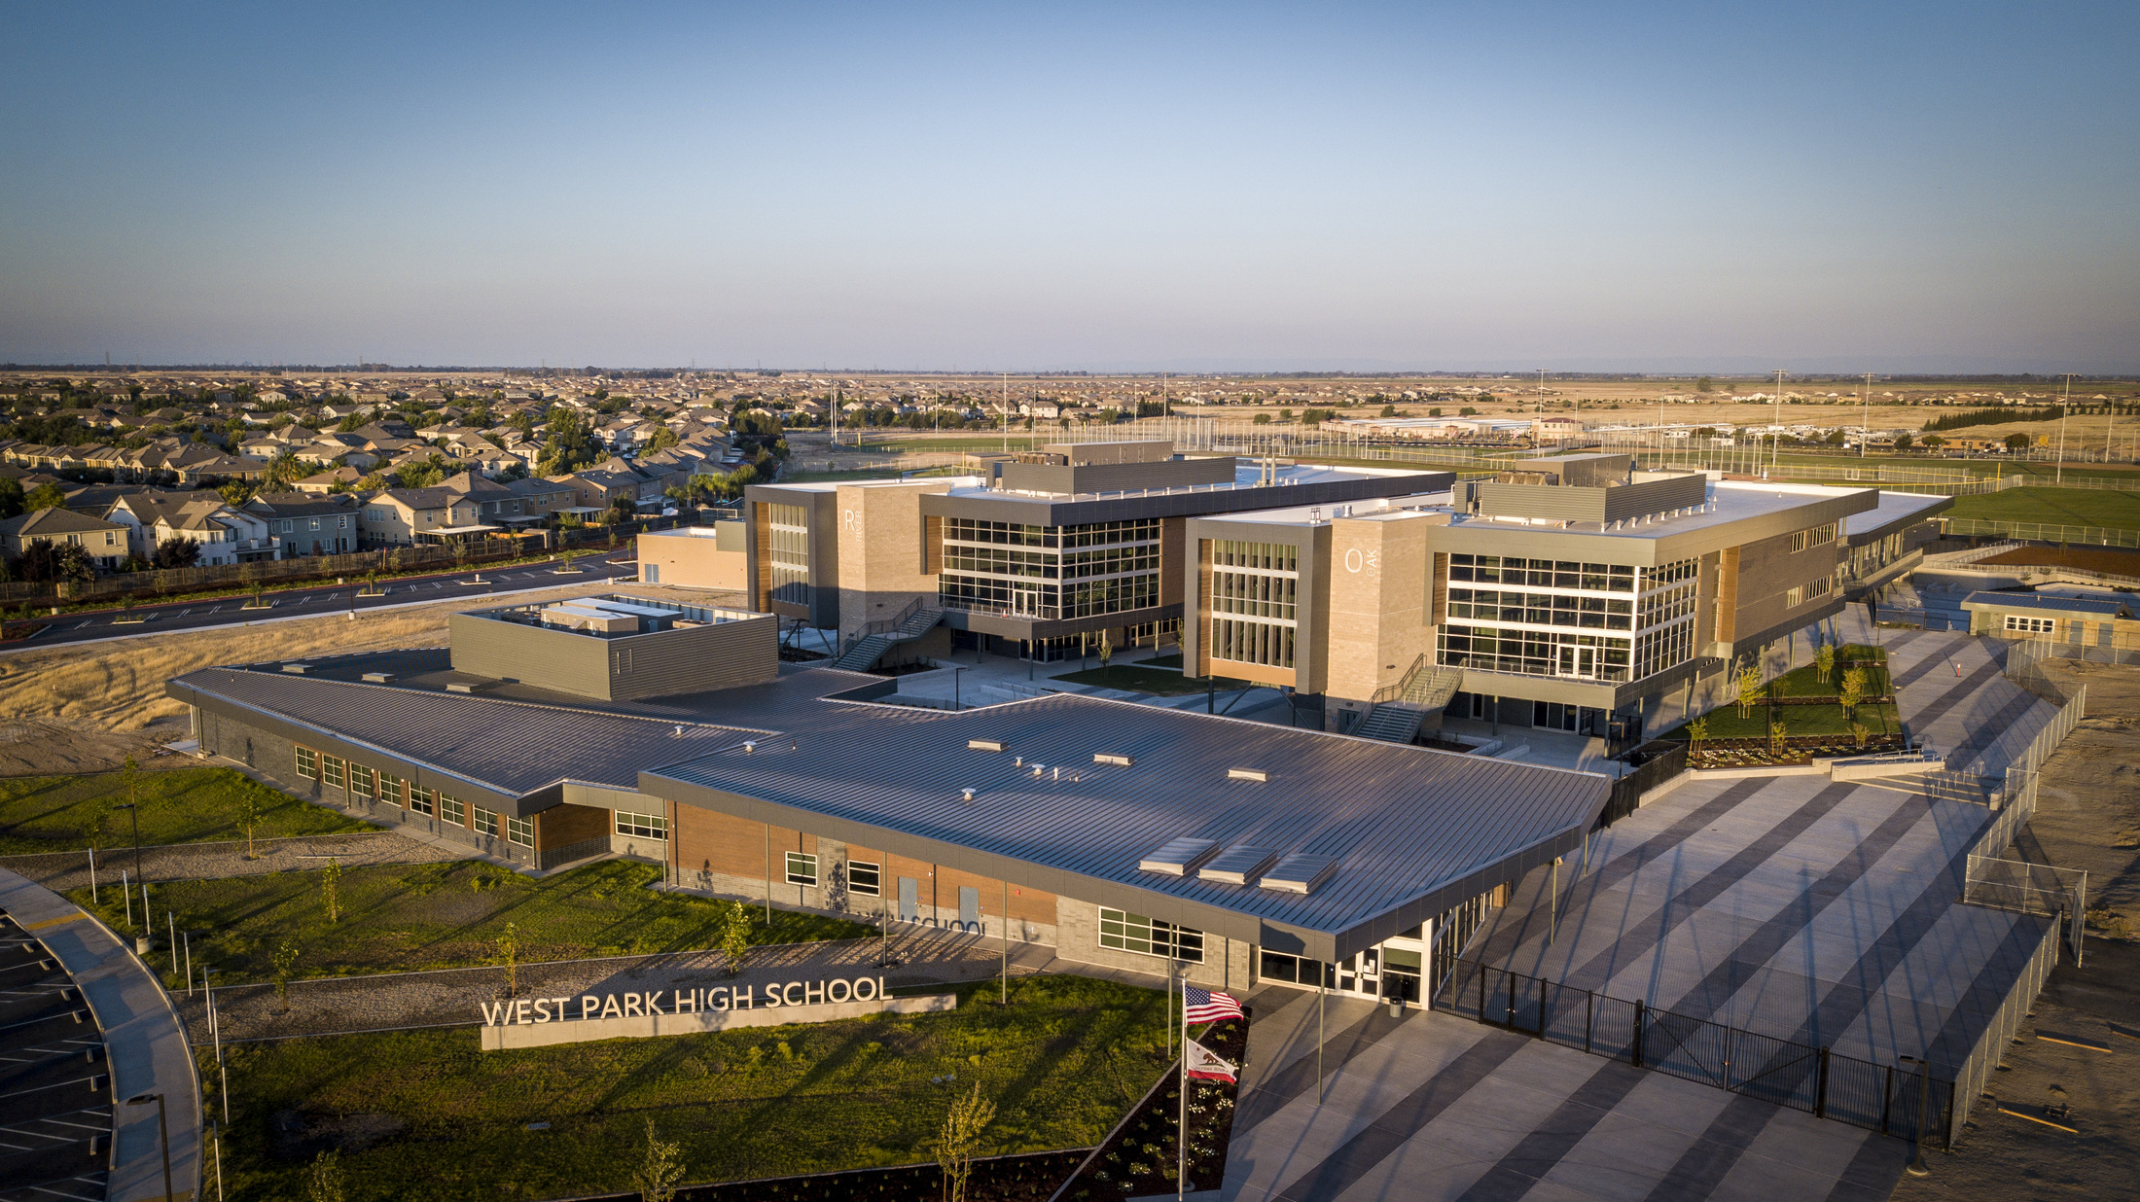 Aerial view of West Park High School